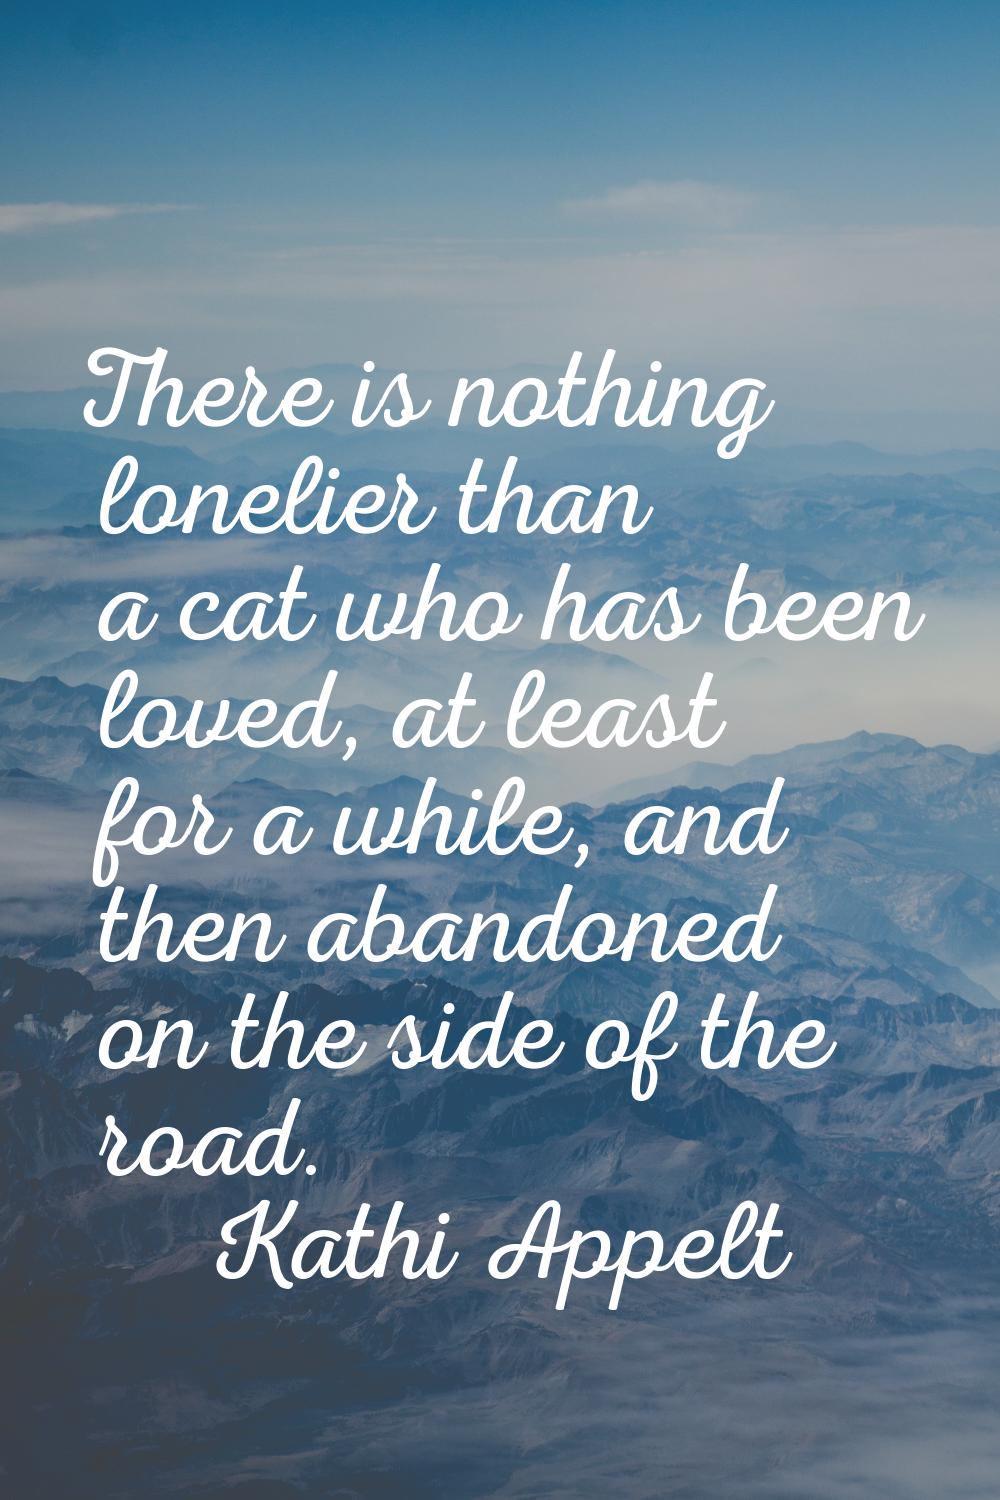 There is nothing lonelier than a cat who has been loved, at least for a while, and then abandoned o